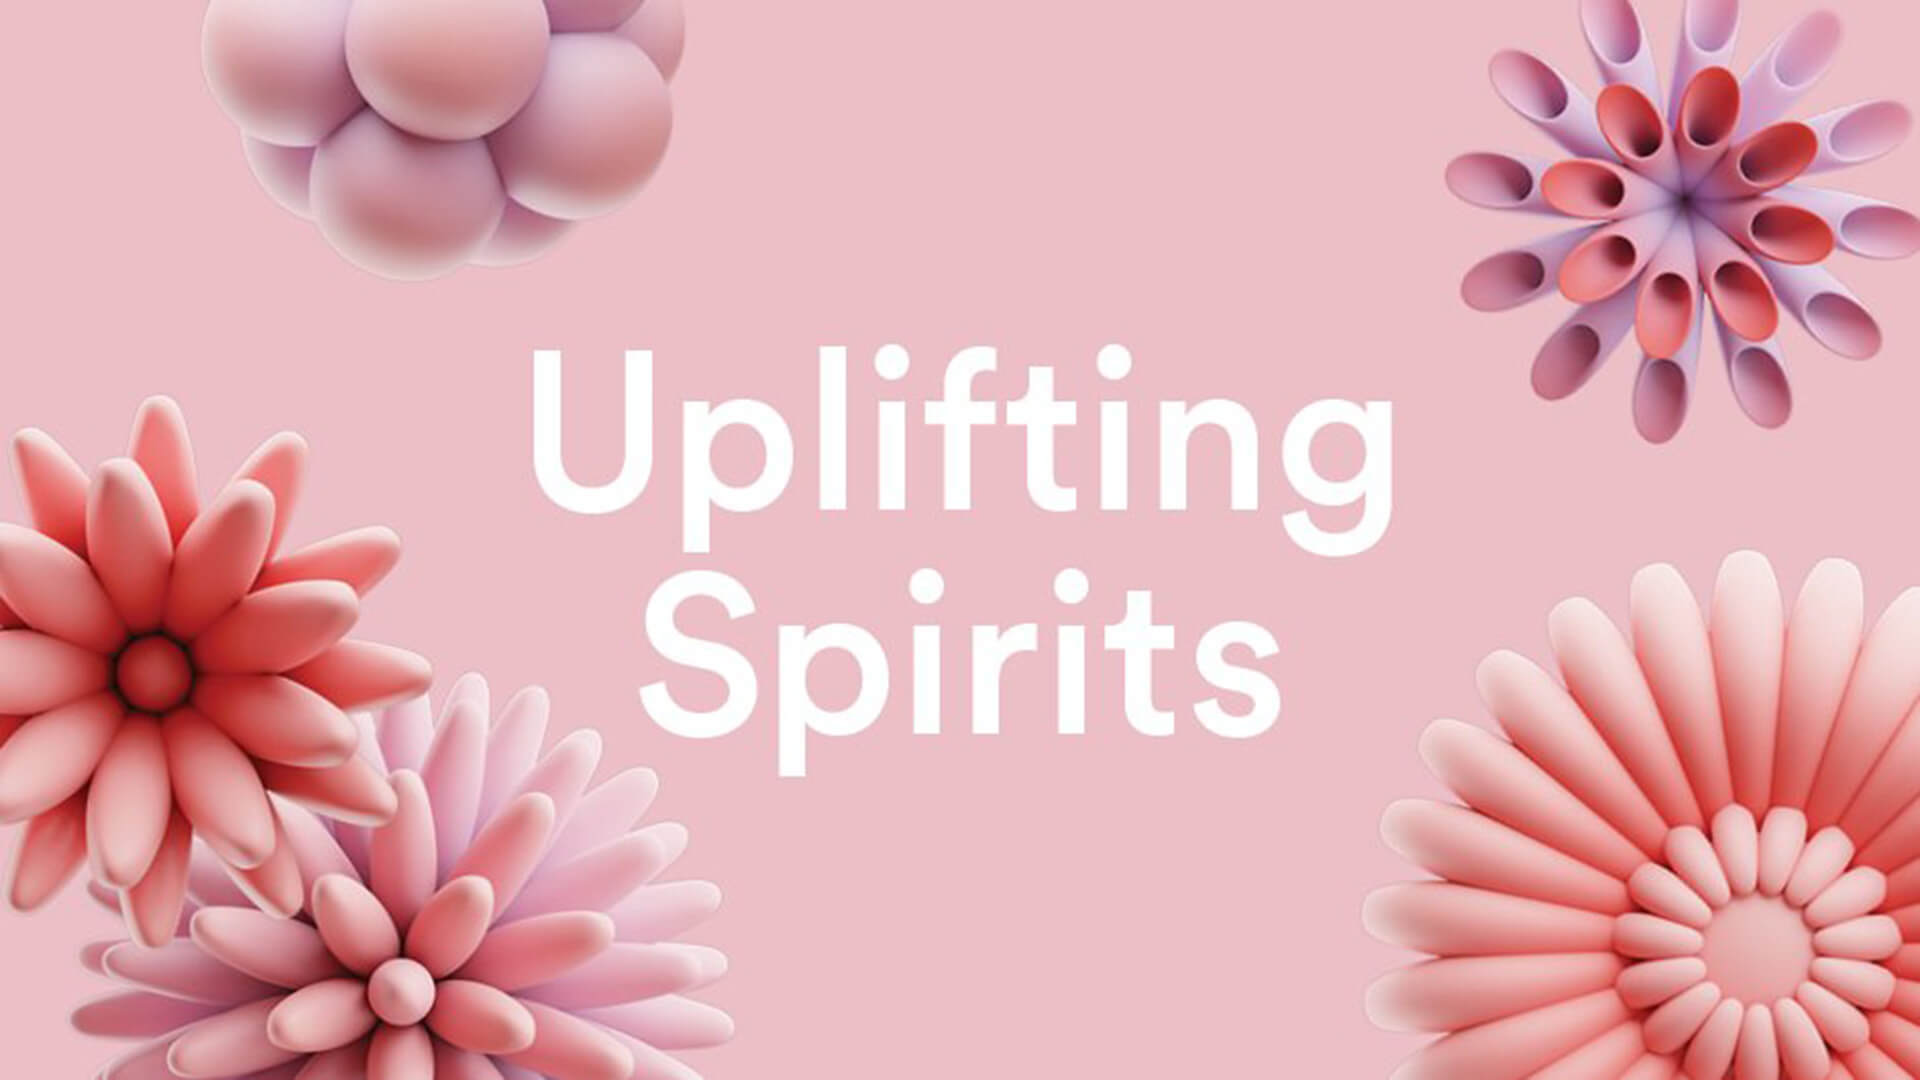 Graphic from the Macquarie Center Uplifting Spirits Spring experiential brand activation by VANDAL